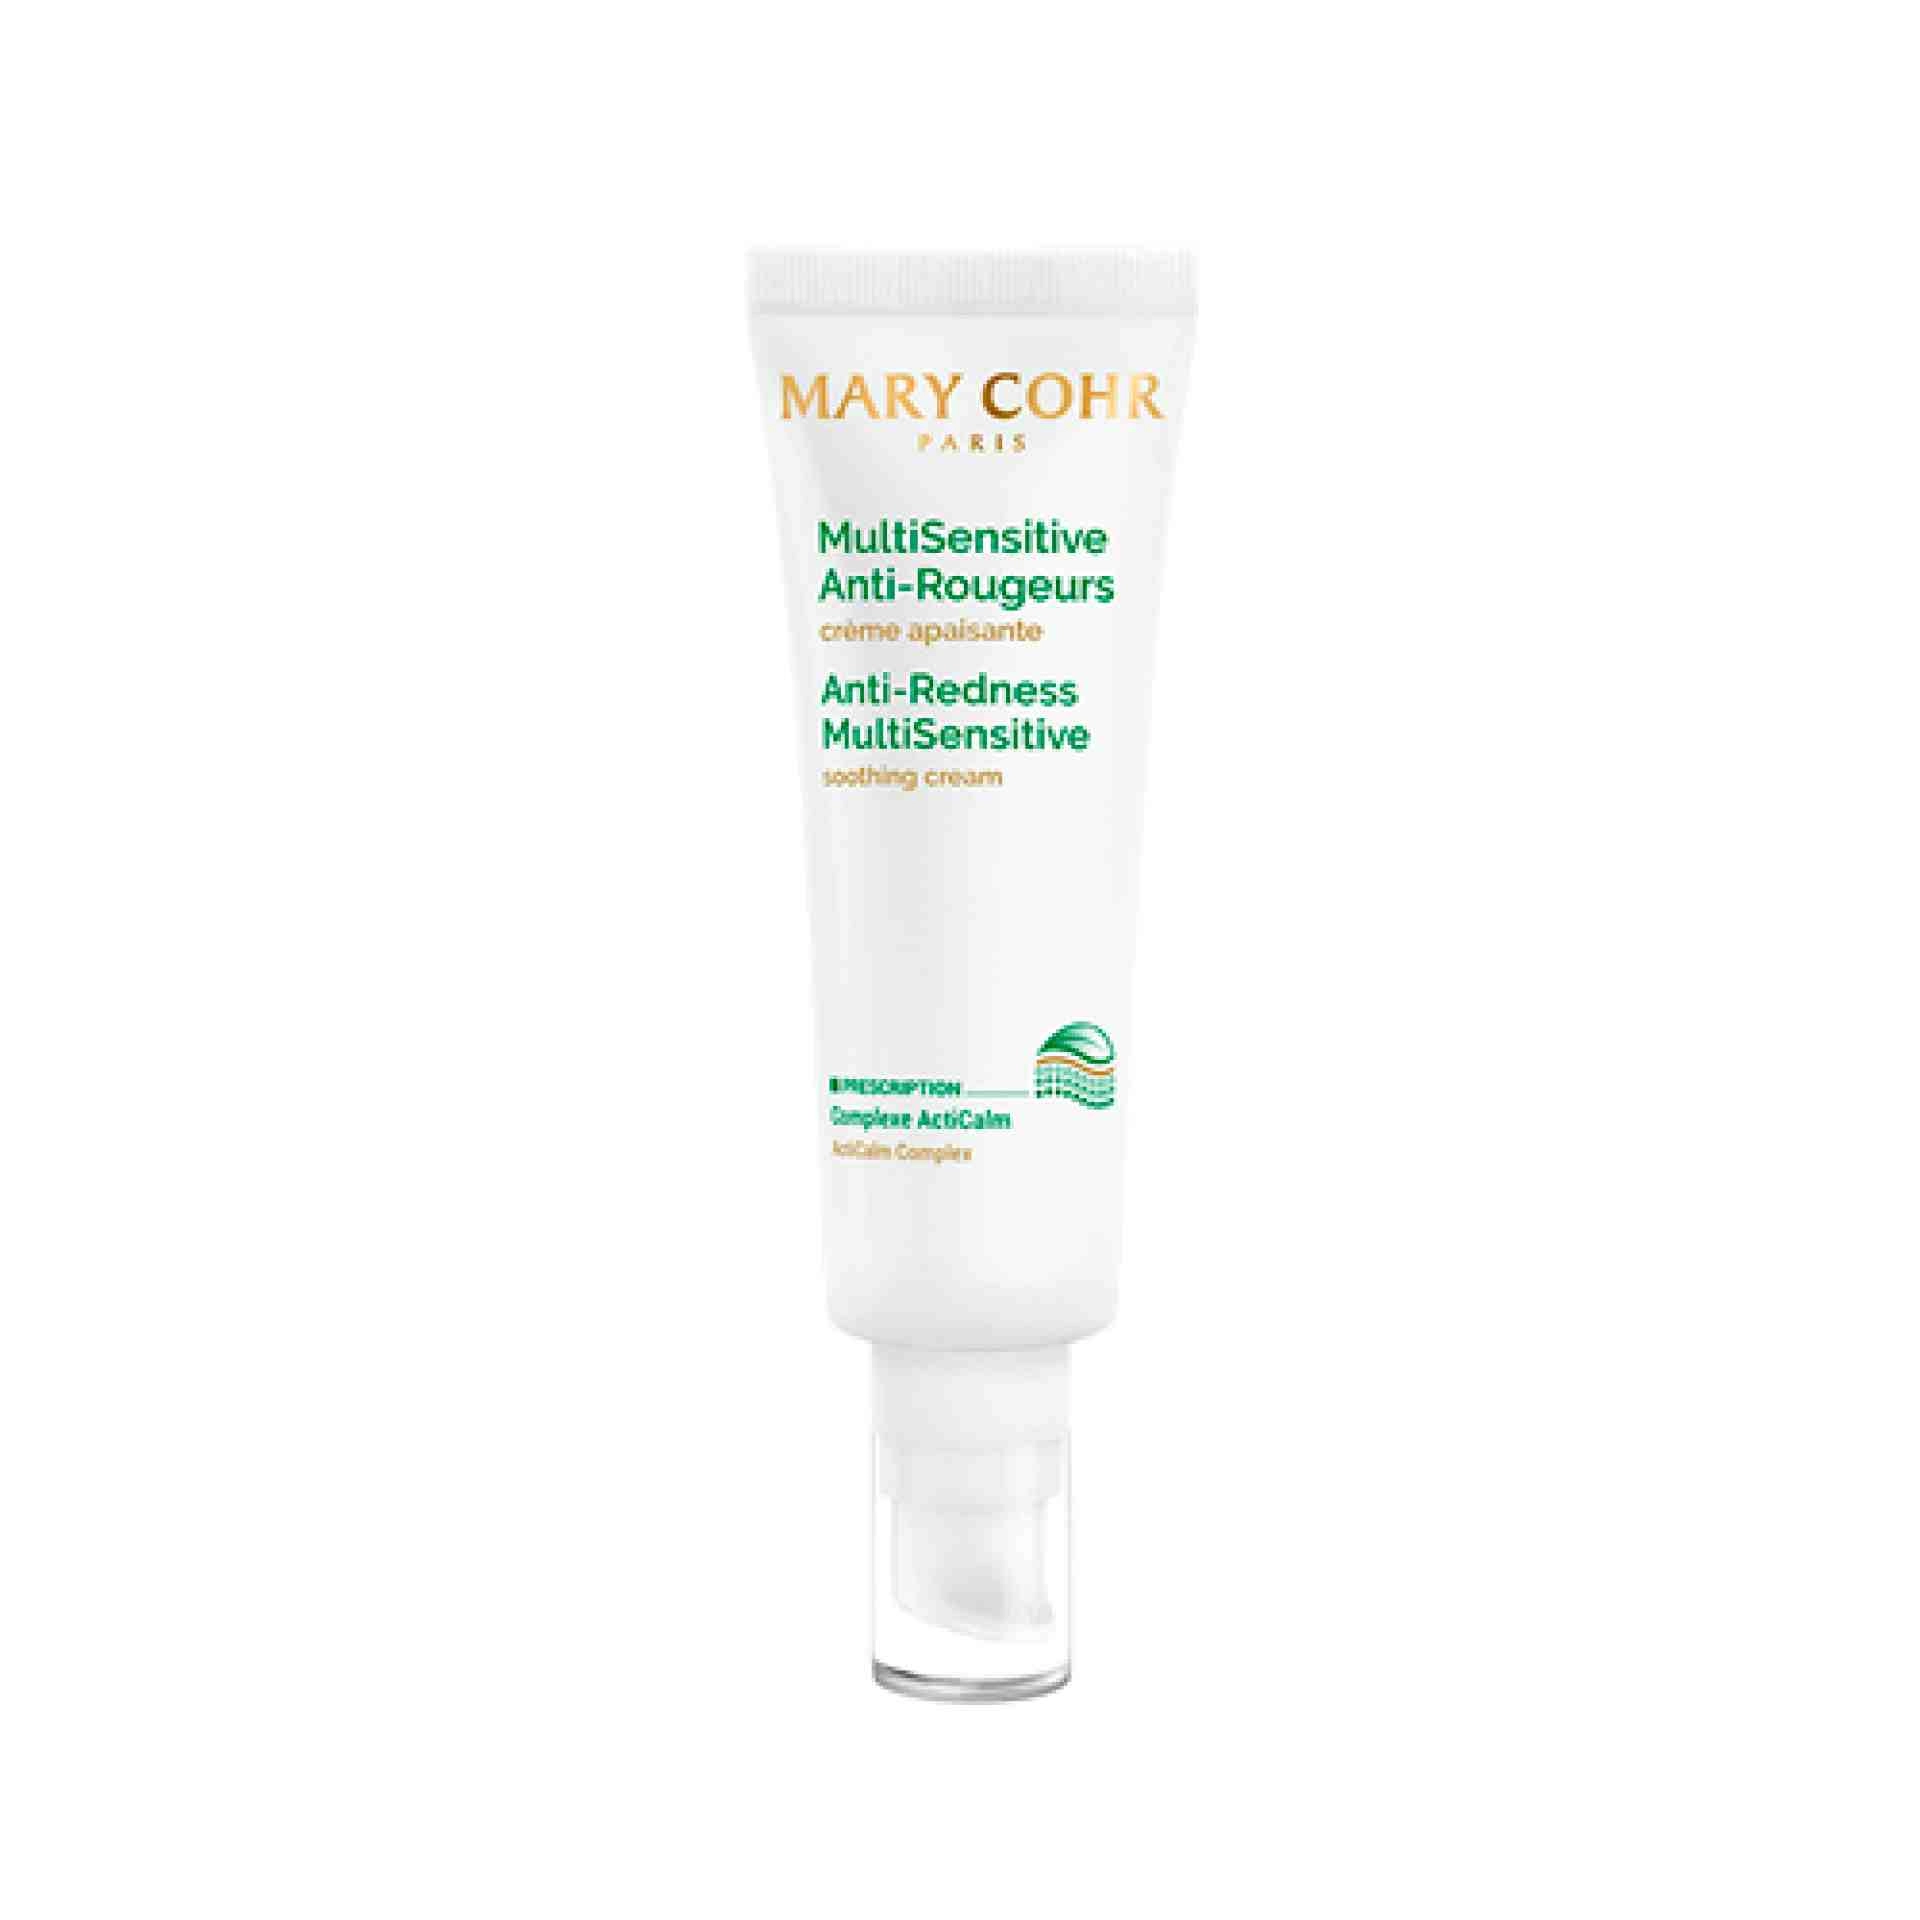 MultiSensitive Anti-Rougeurs | Corrector Anti-rojeces 50ml - Mary Cohr ®